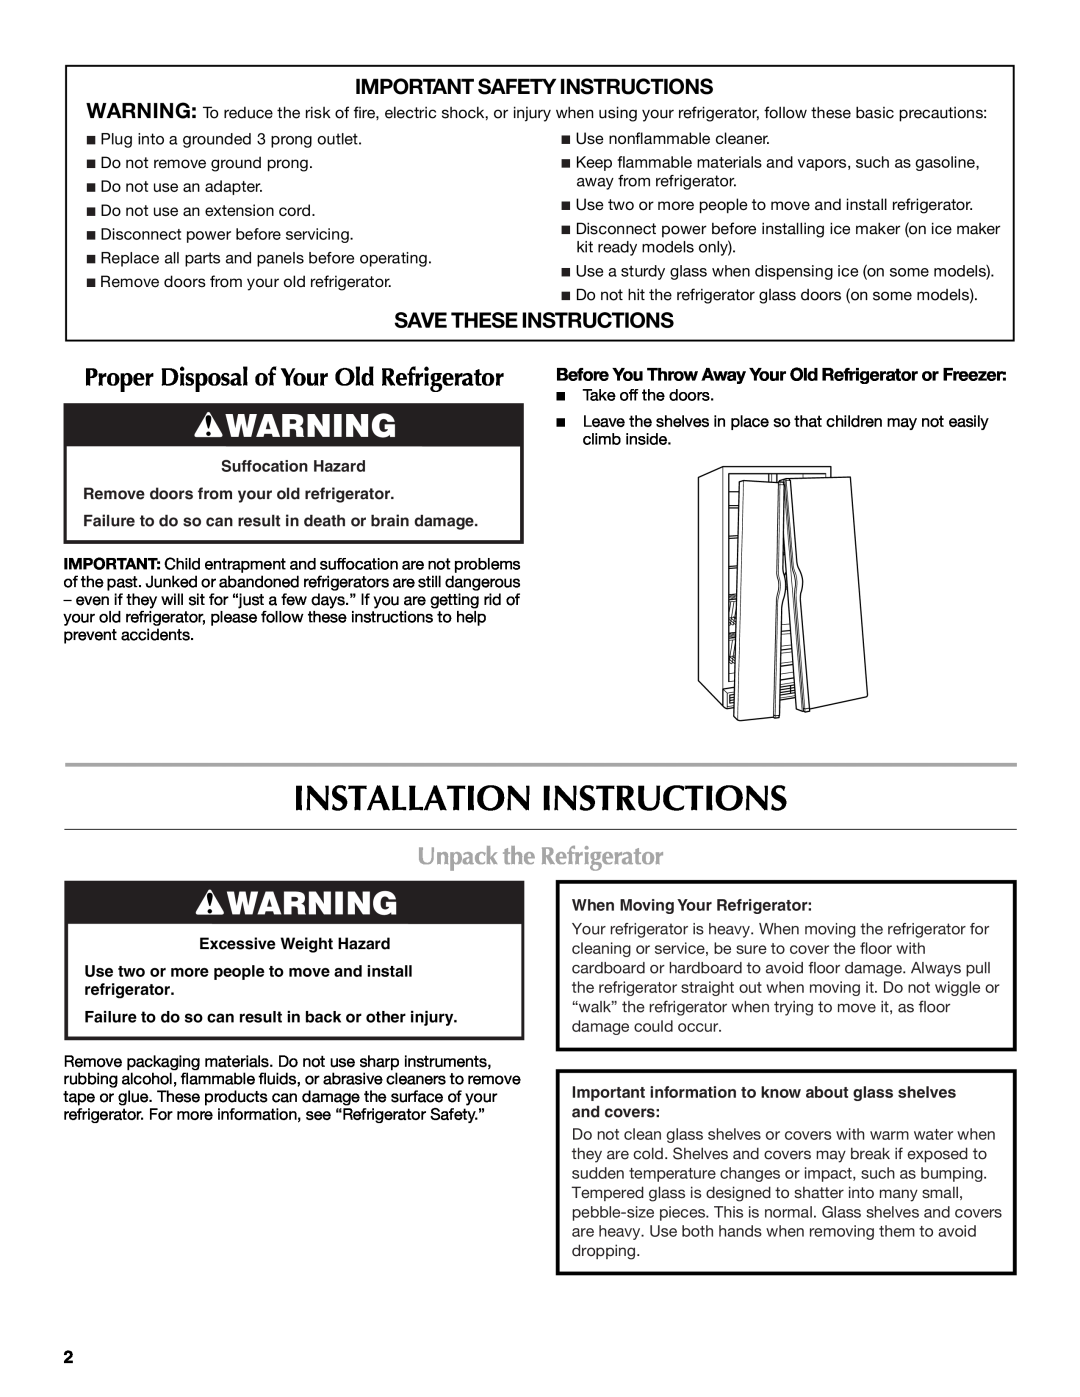 Maytag W10321477A Installation Instructions, Unpack the Refrigerator, Important Safety Instructions 